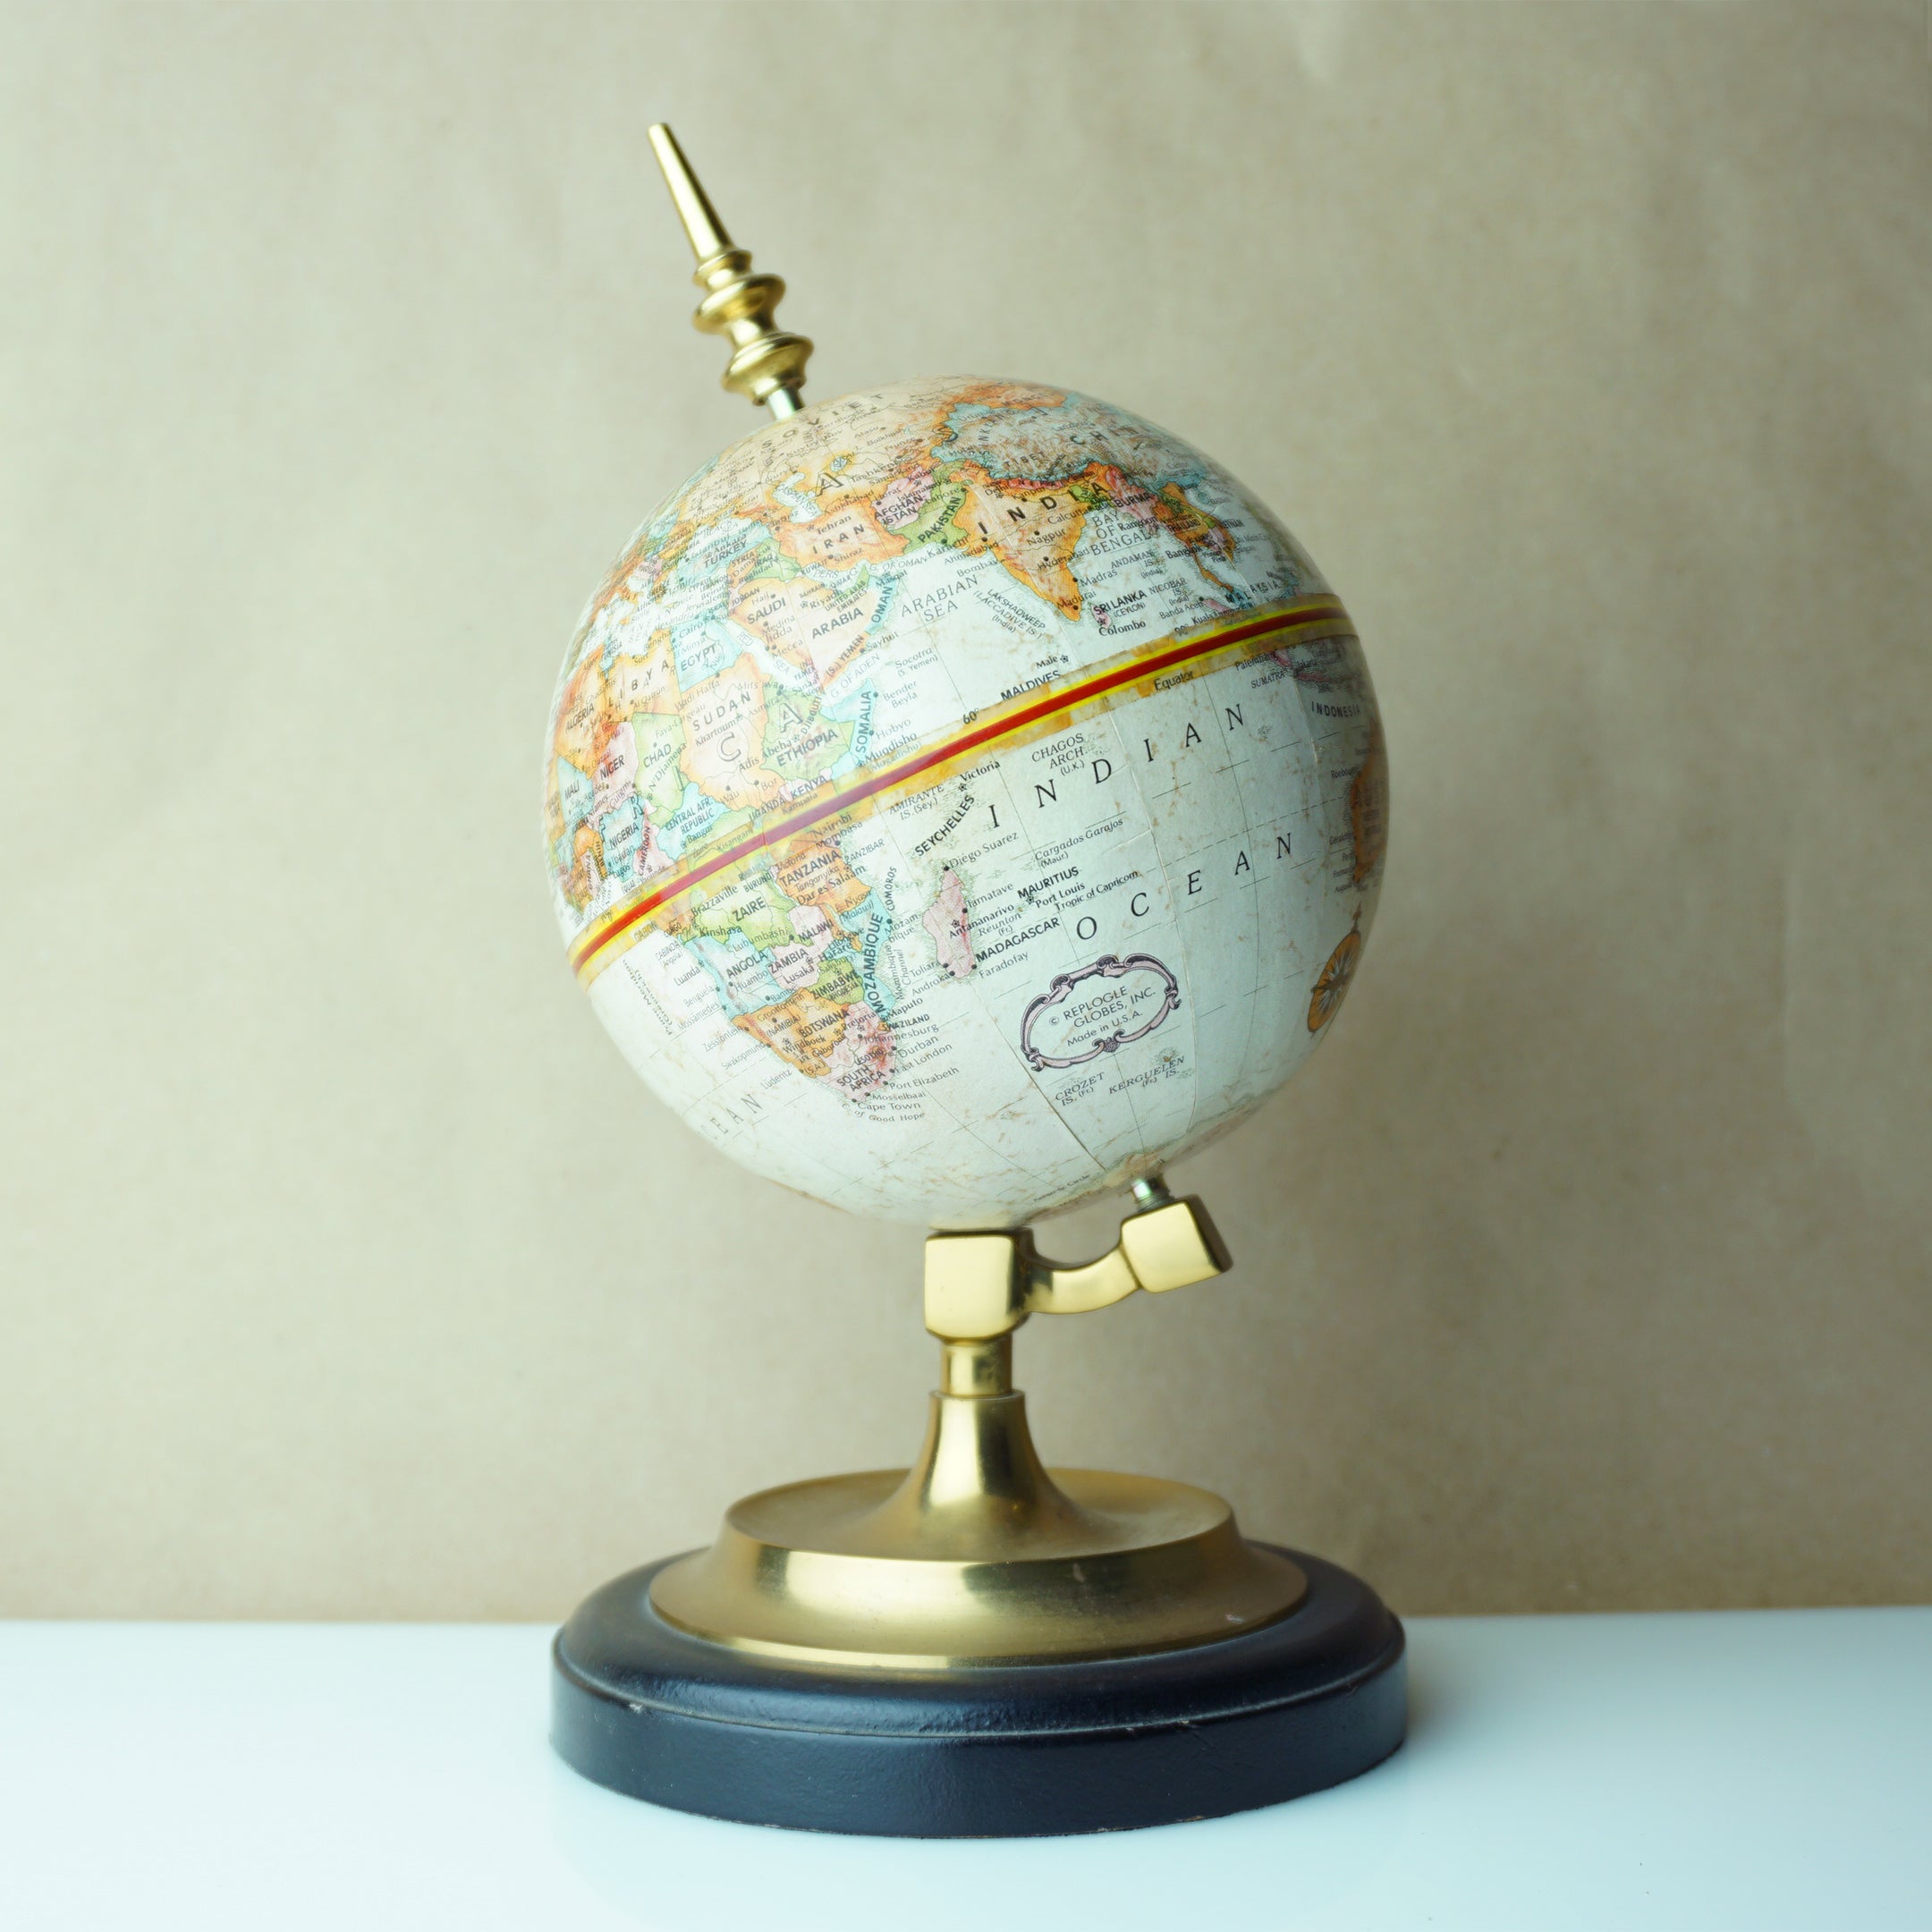 Vintage 9" Replogle World Classic Series Globe. Gold Toned with Black Wood Base. Made in USA.